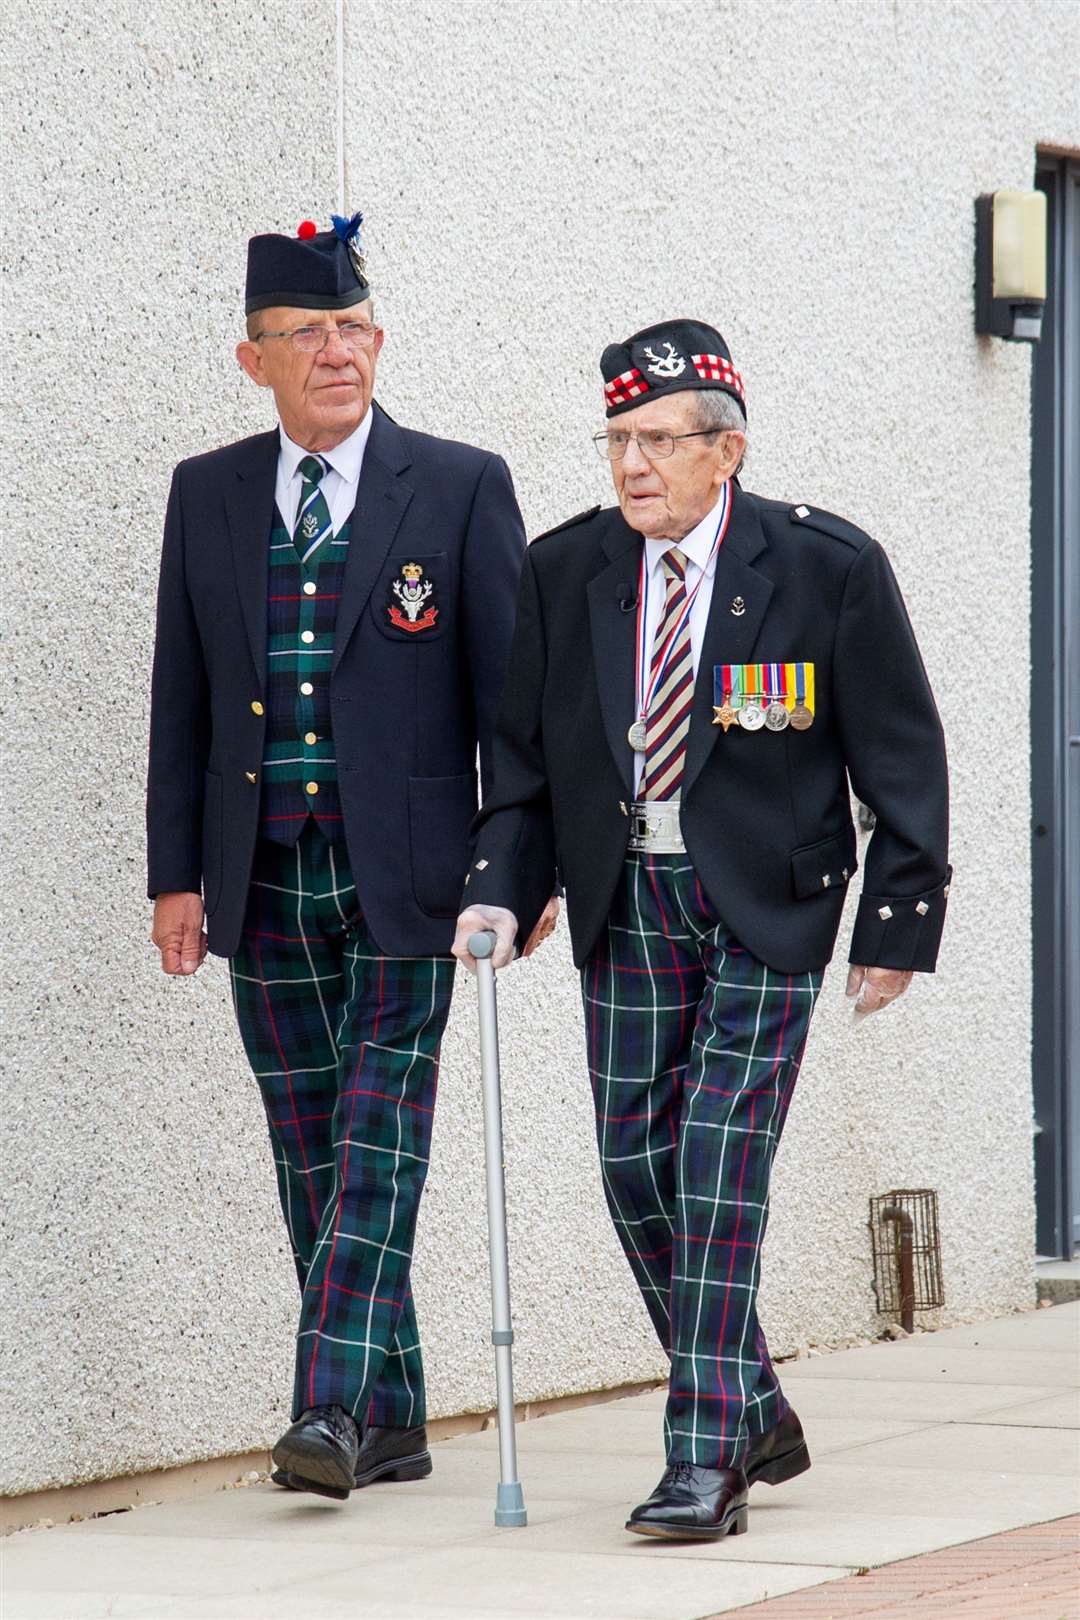 Albert (left) served in the military for over two decades. Daniel Forsyth